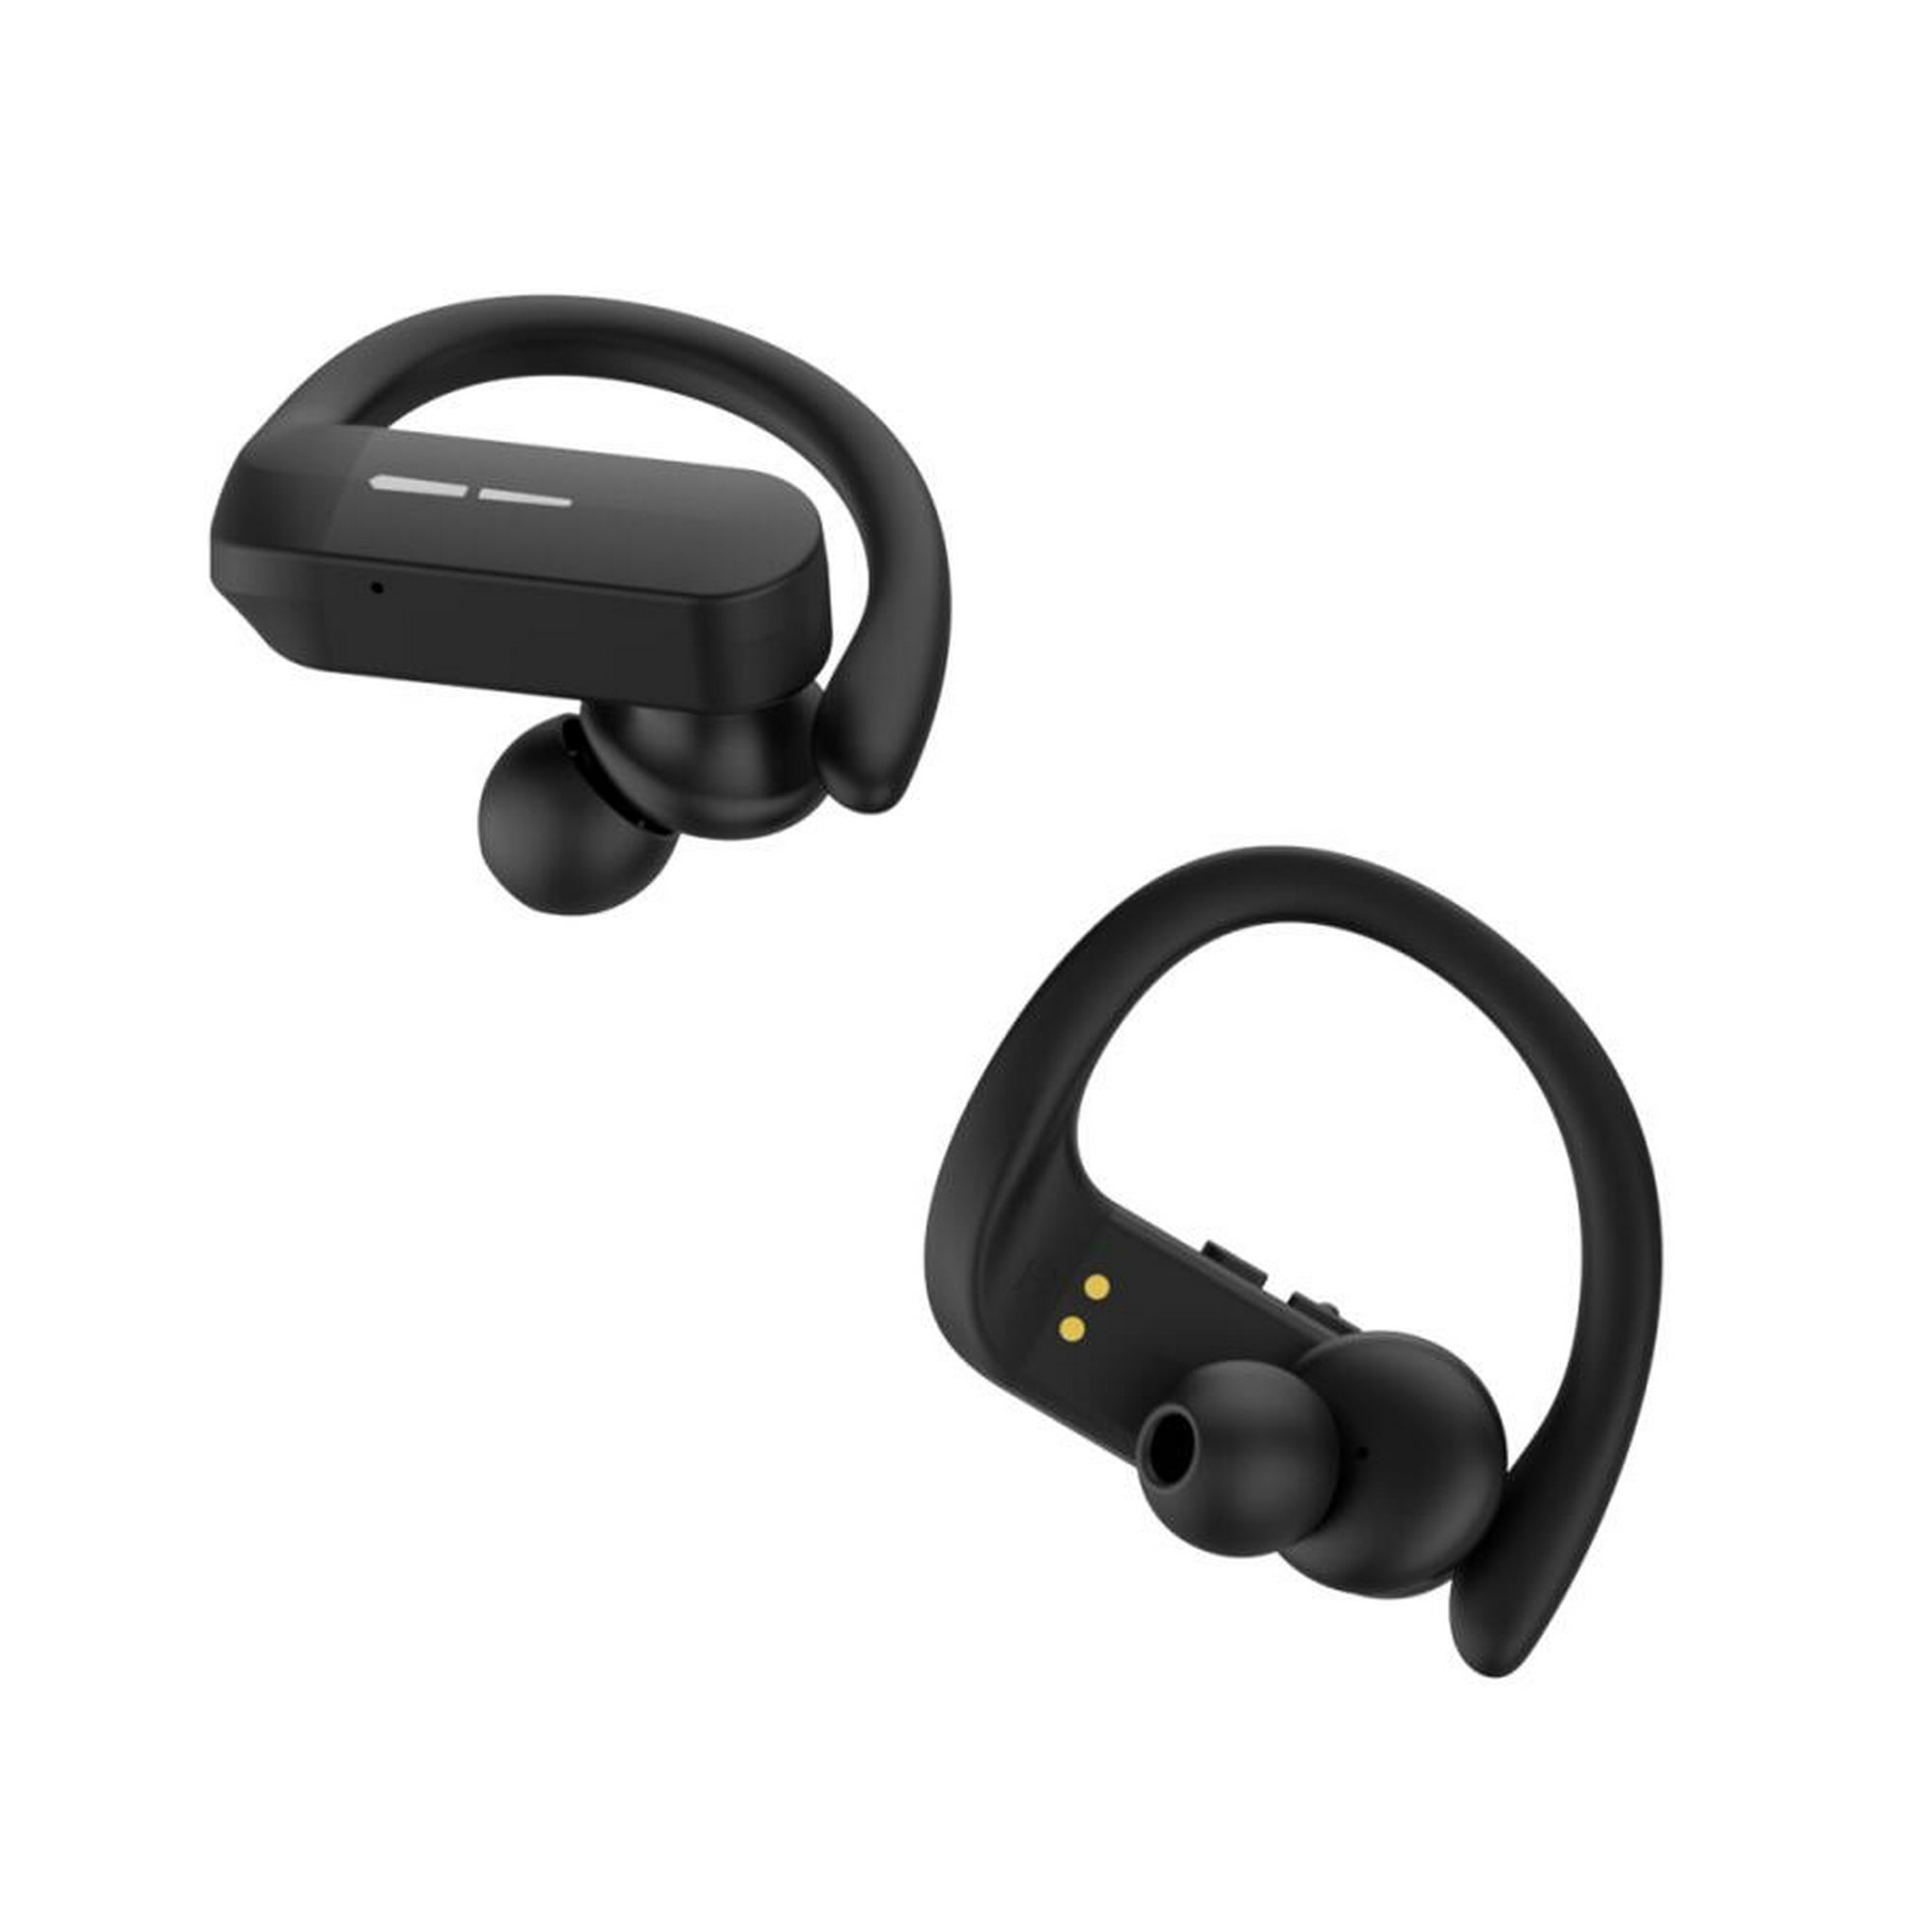 Sport Wireless Earbuds 5.3, Headphones Built-in Mic in Headset with Earhooks Charging Case for Sports ,Running, Gym, Exercise Walmart.com